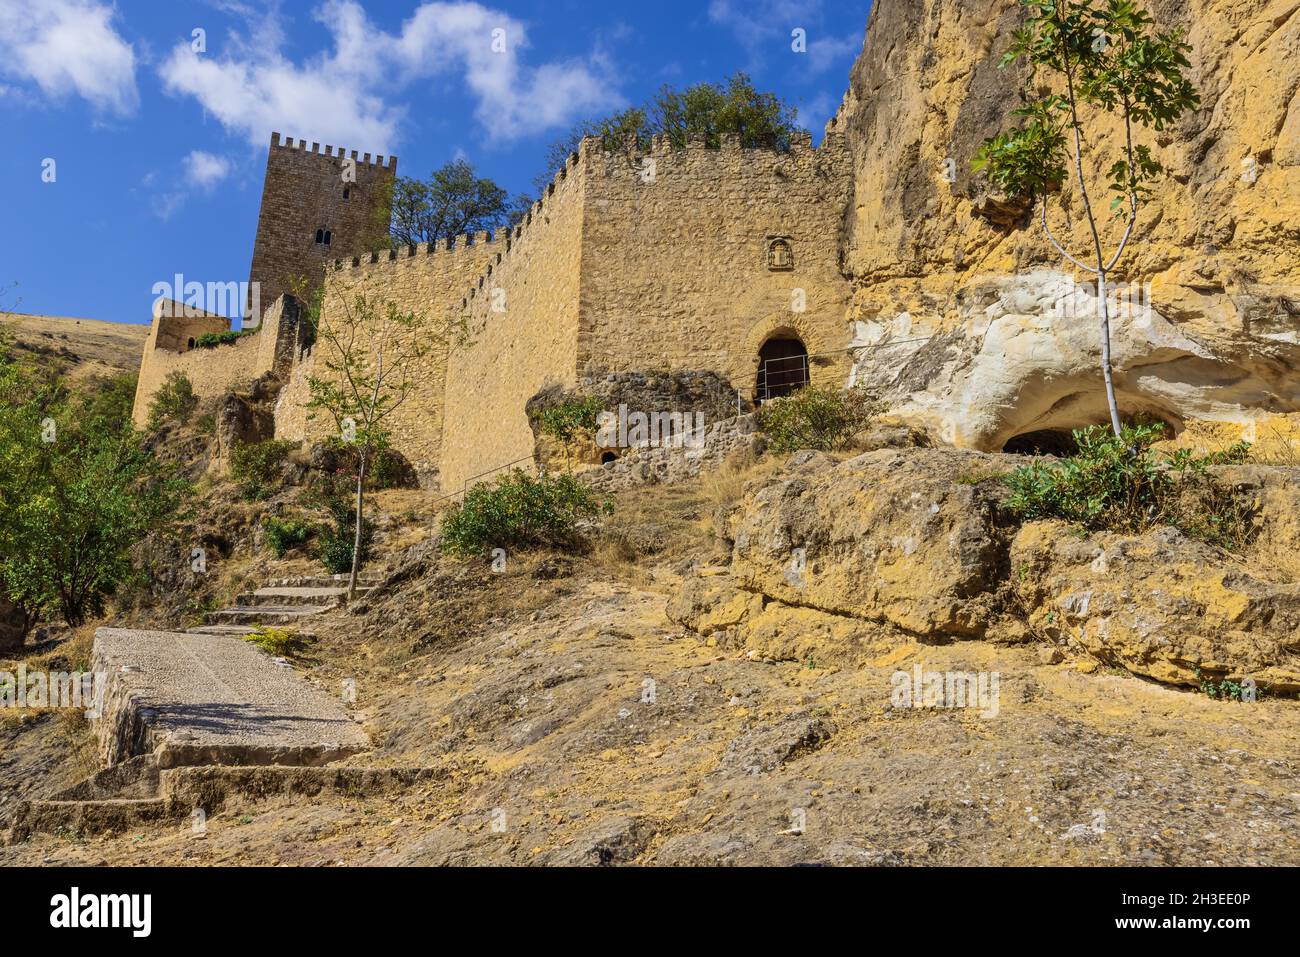 Standing next to the walls of the Yedra castle rising up above the town of Cazorla Stock Photo